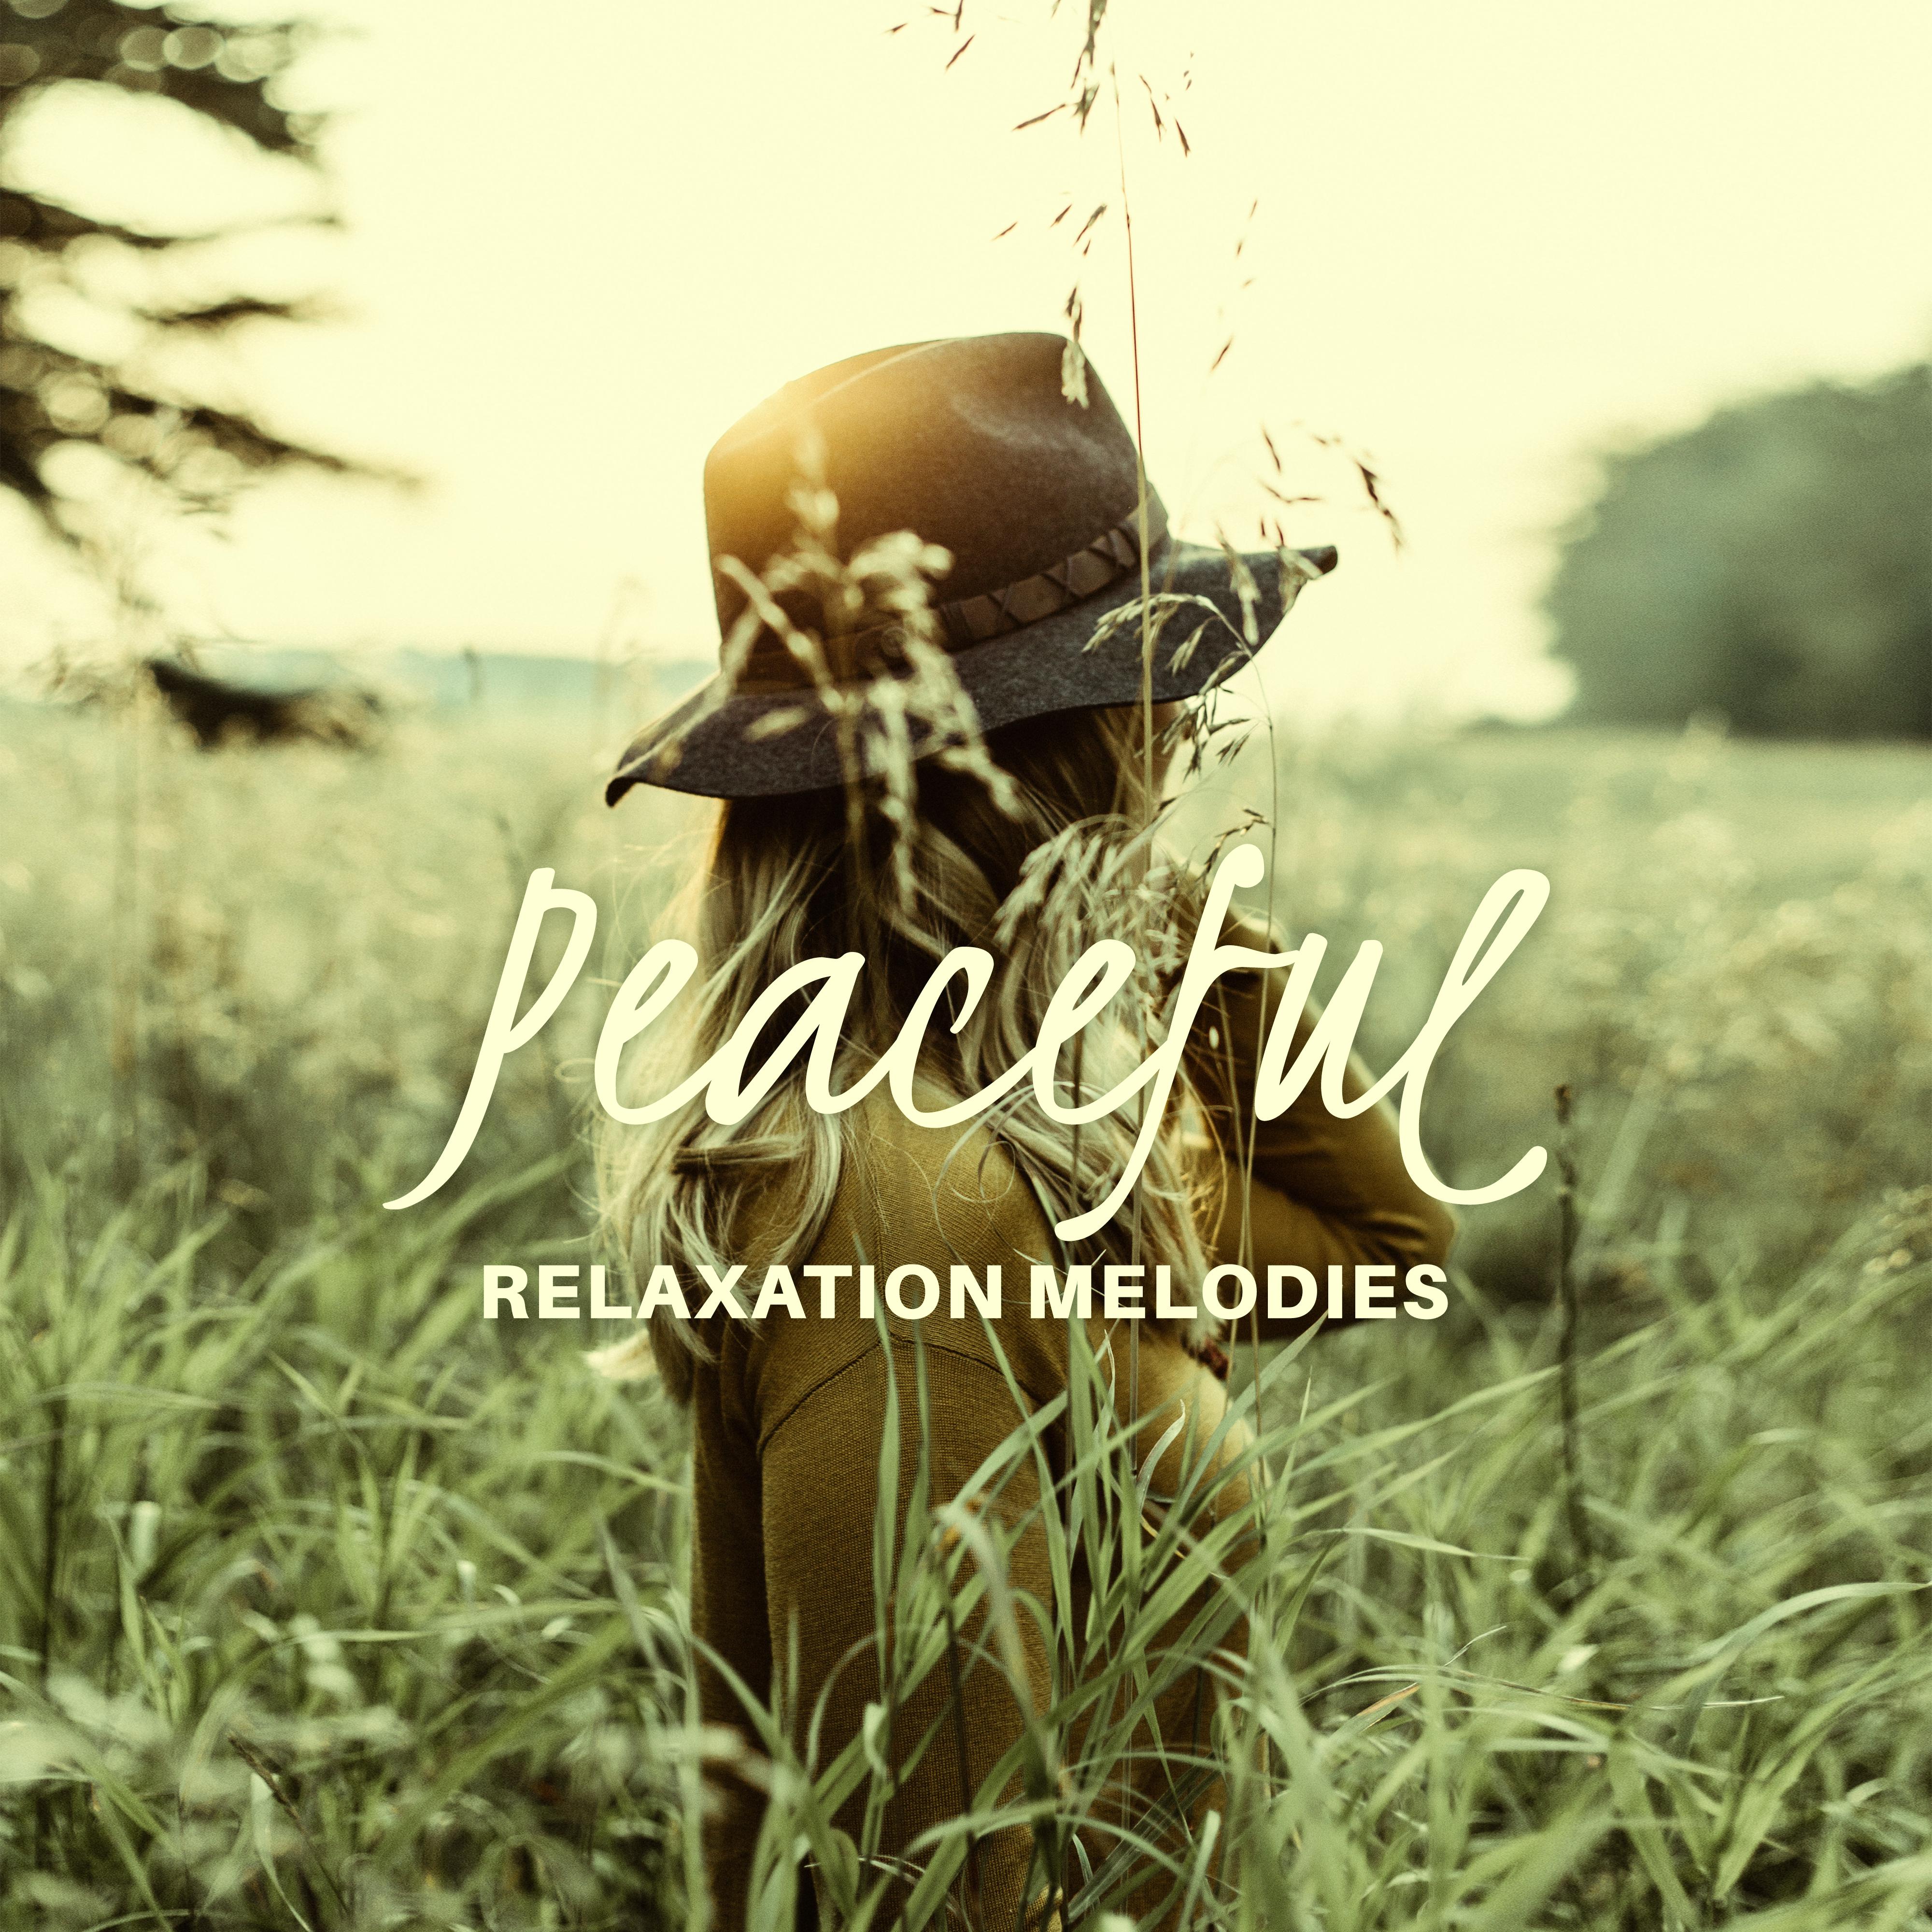 Peaceful Relaxation Melodies